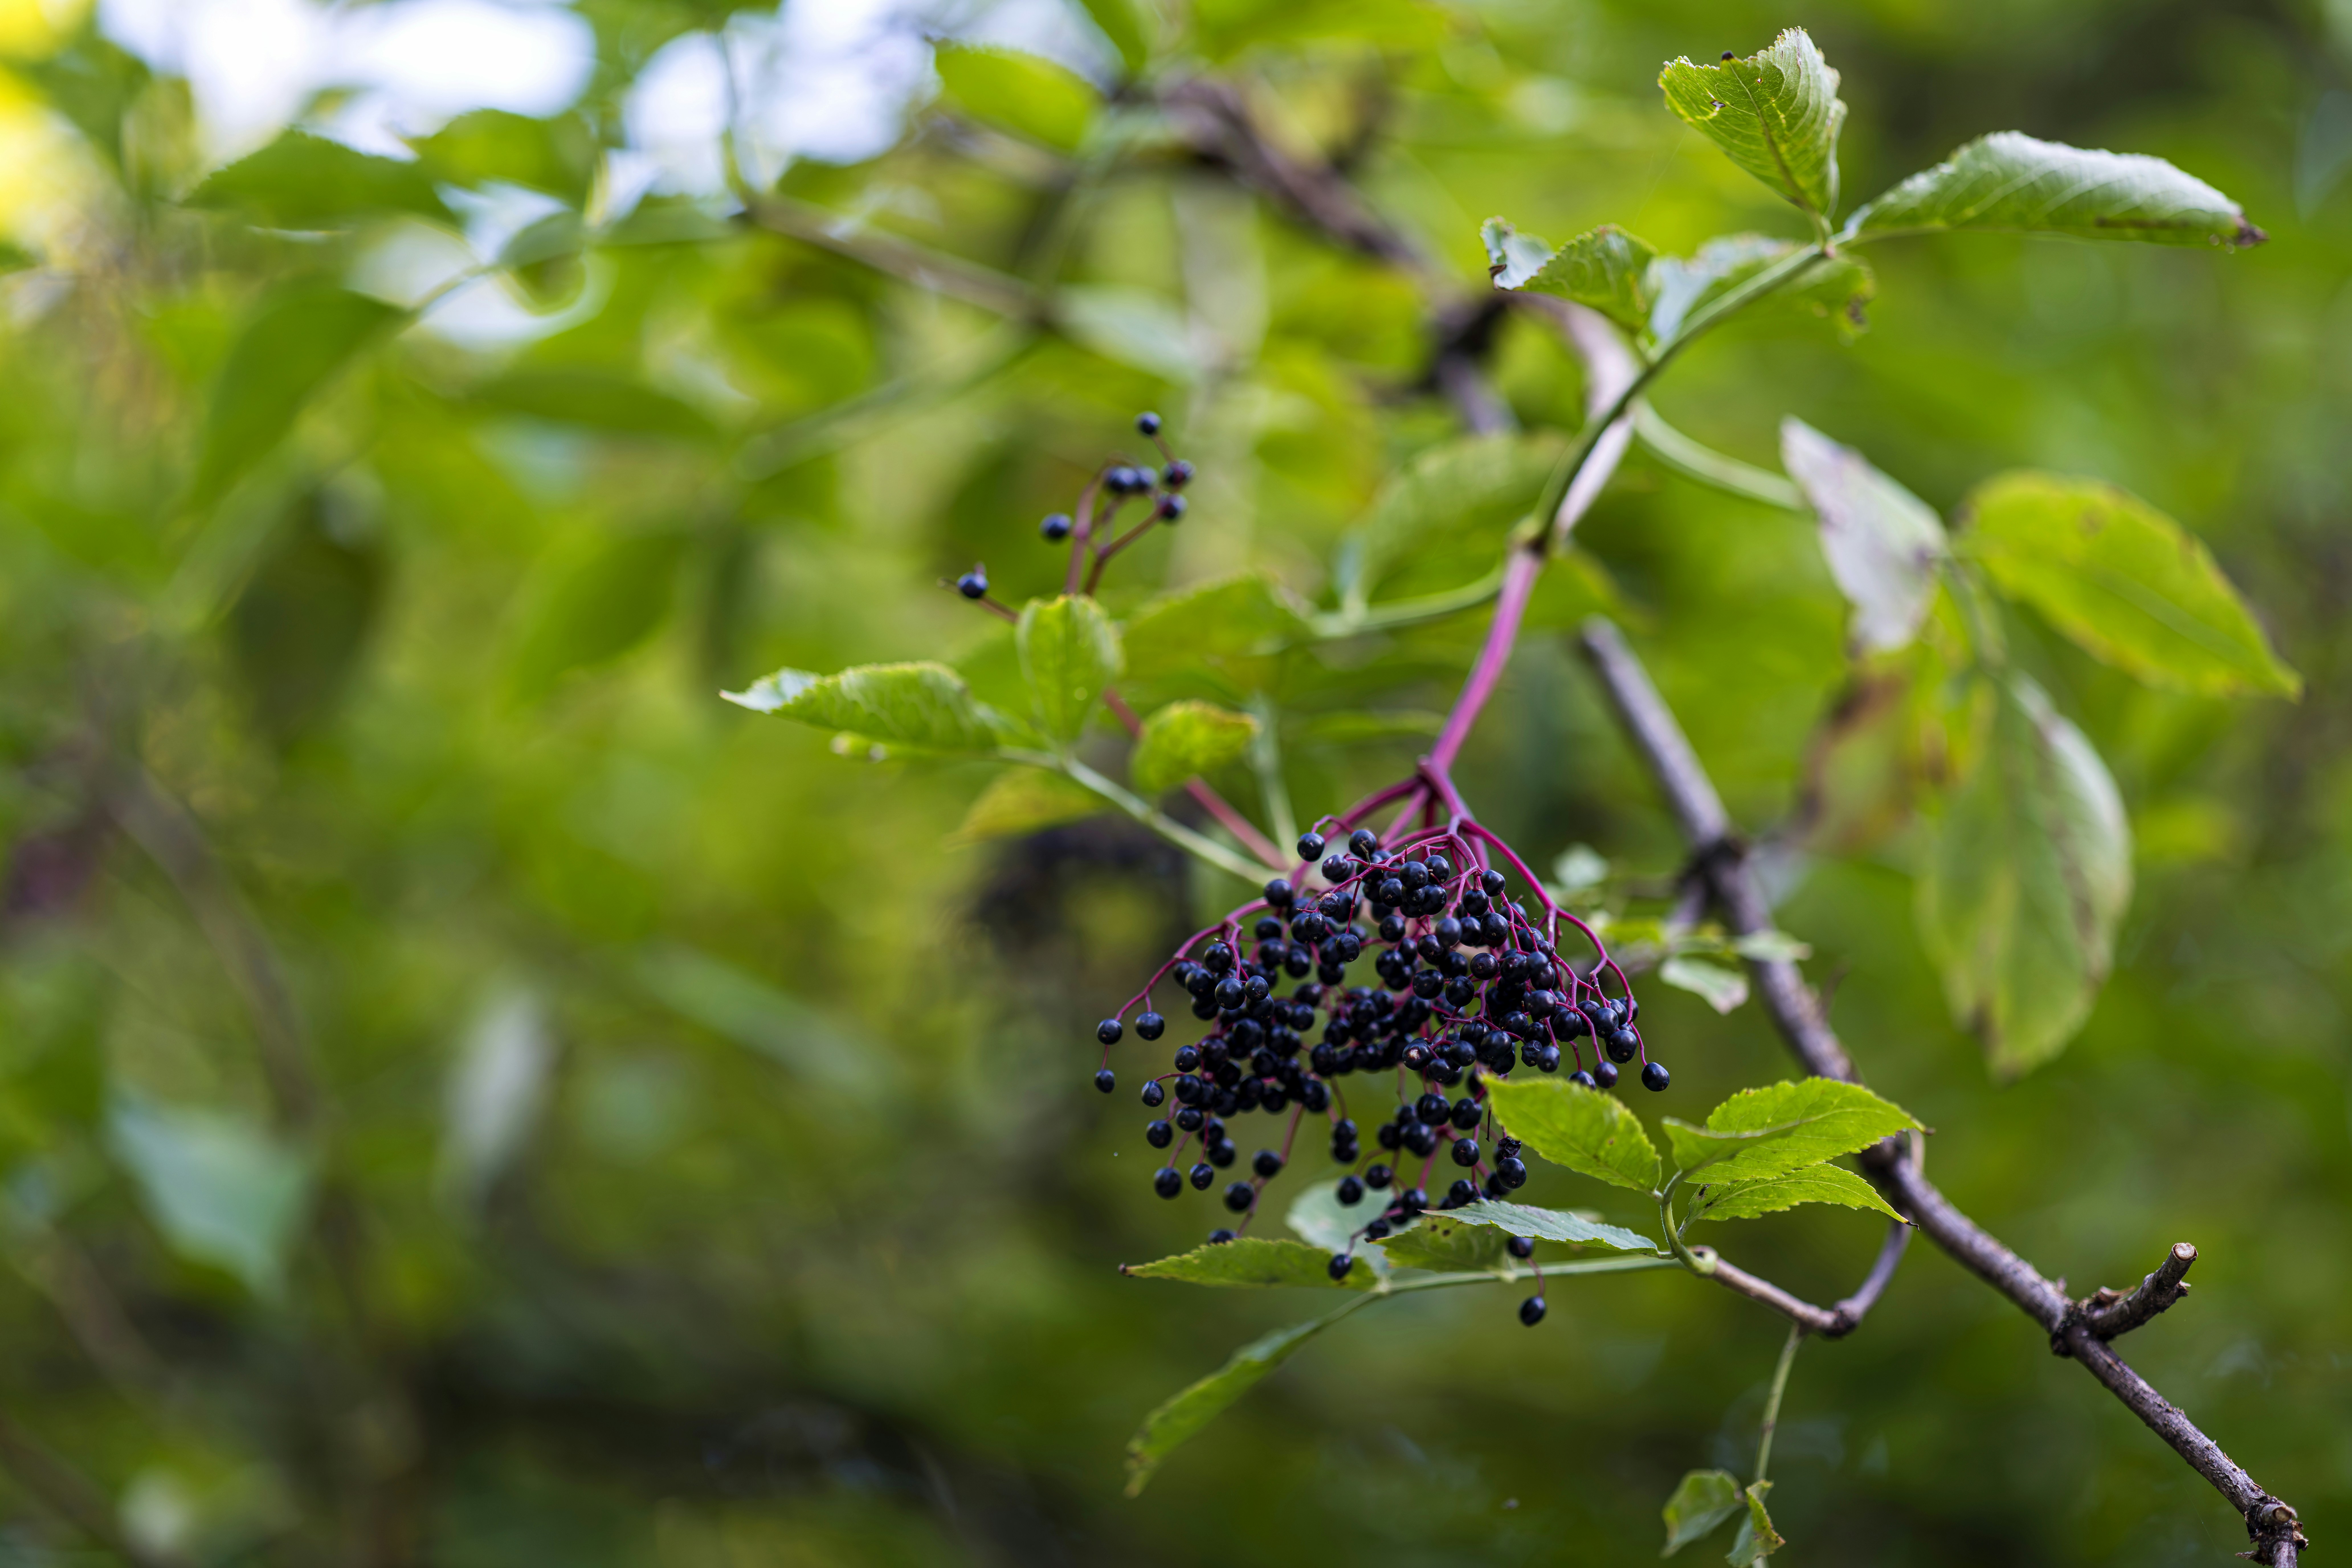 Ripe elderberries hanging from a branch